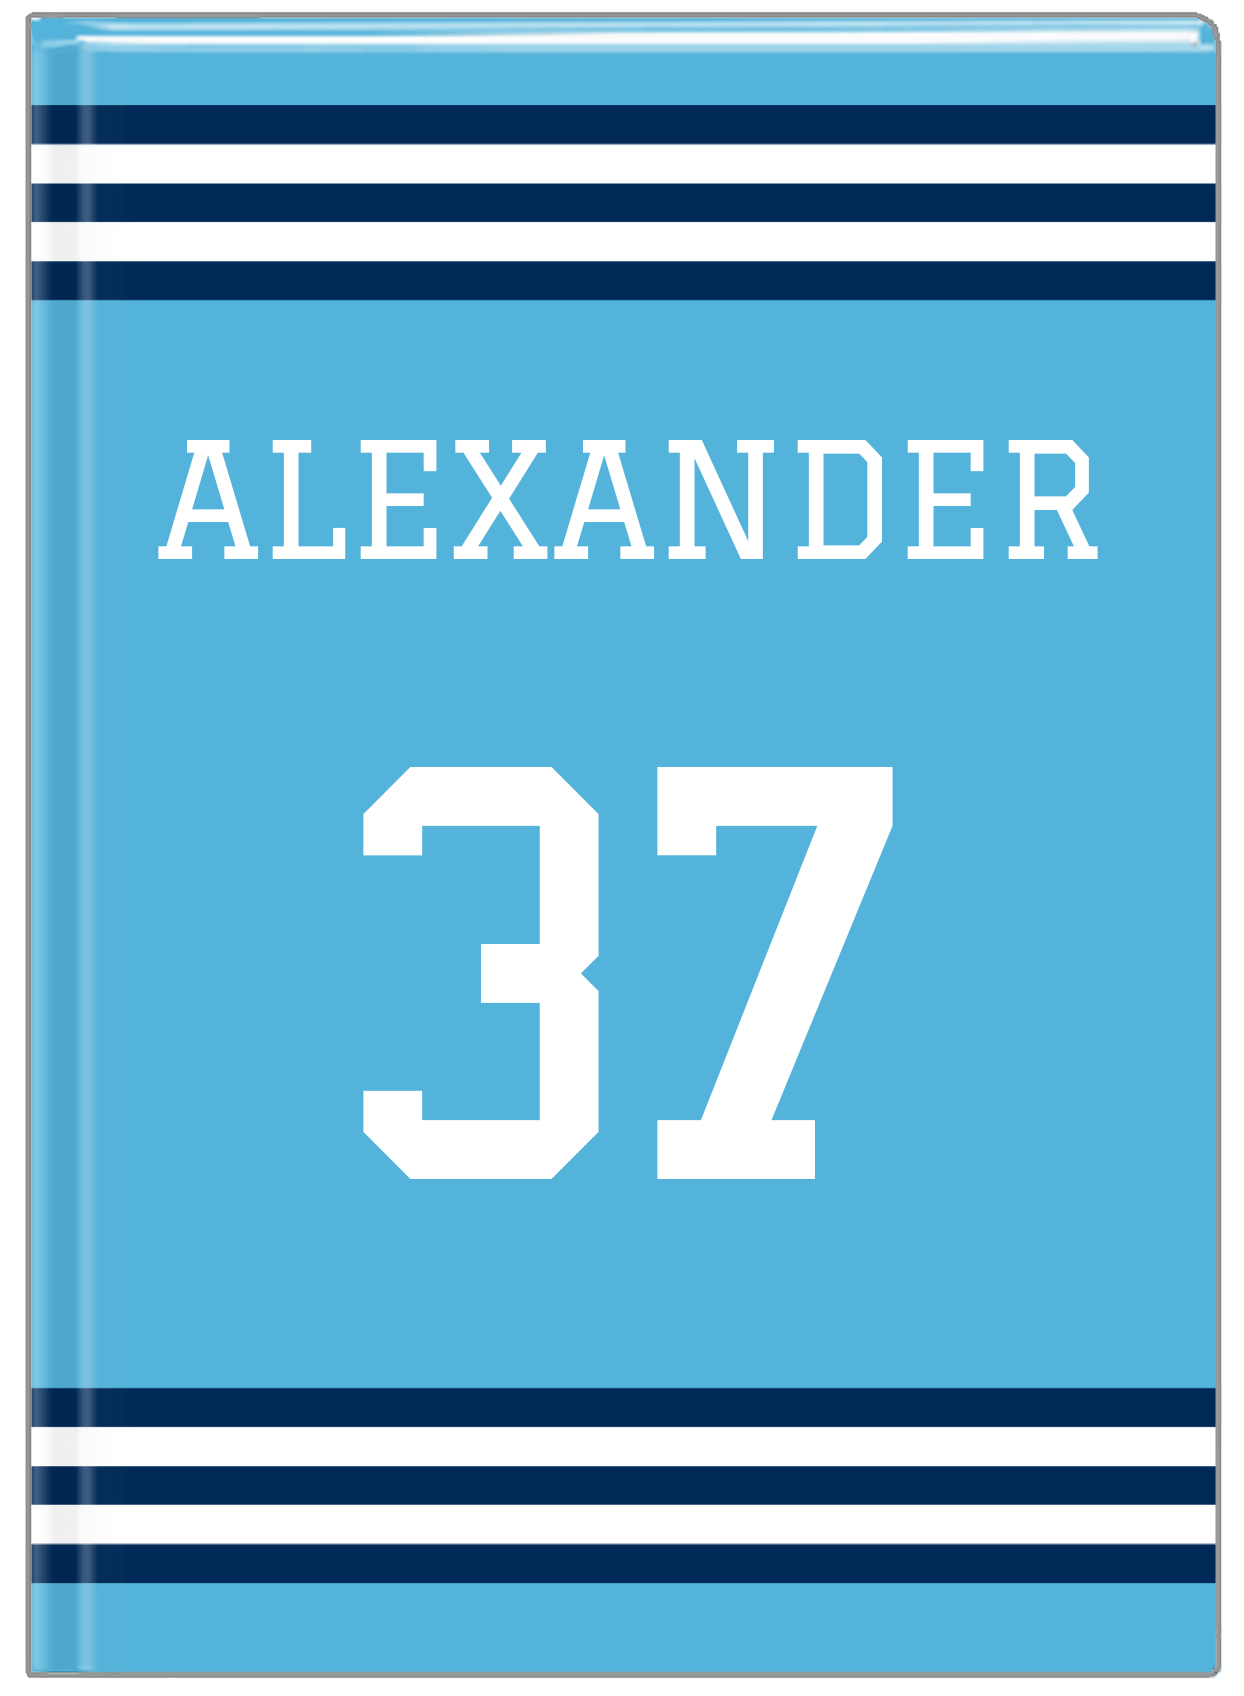 Personalized Jersey Number Journal - Blue and Navy - Double Stripe - Front View